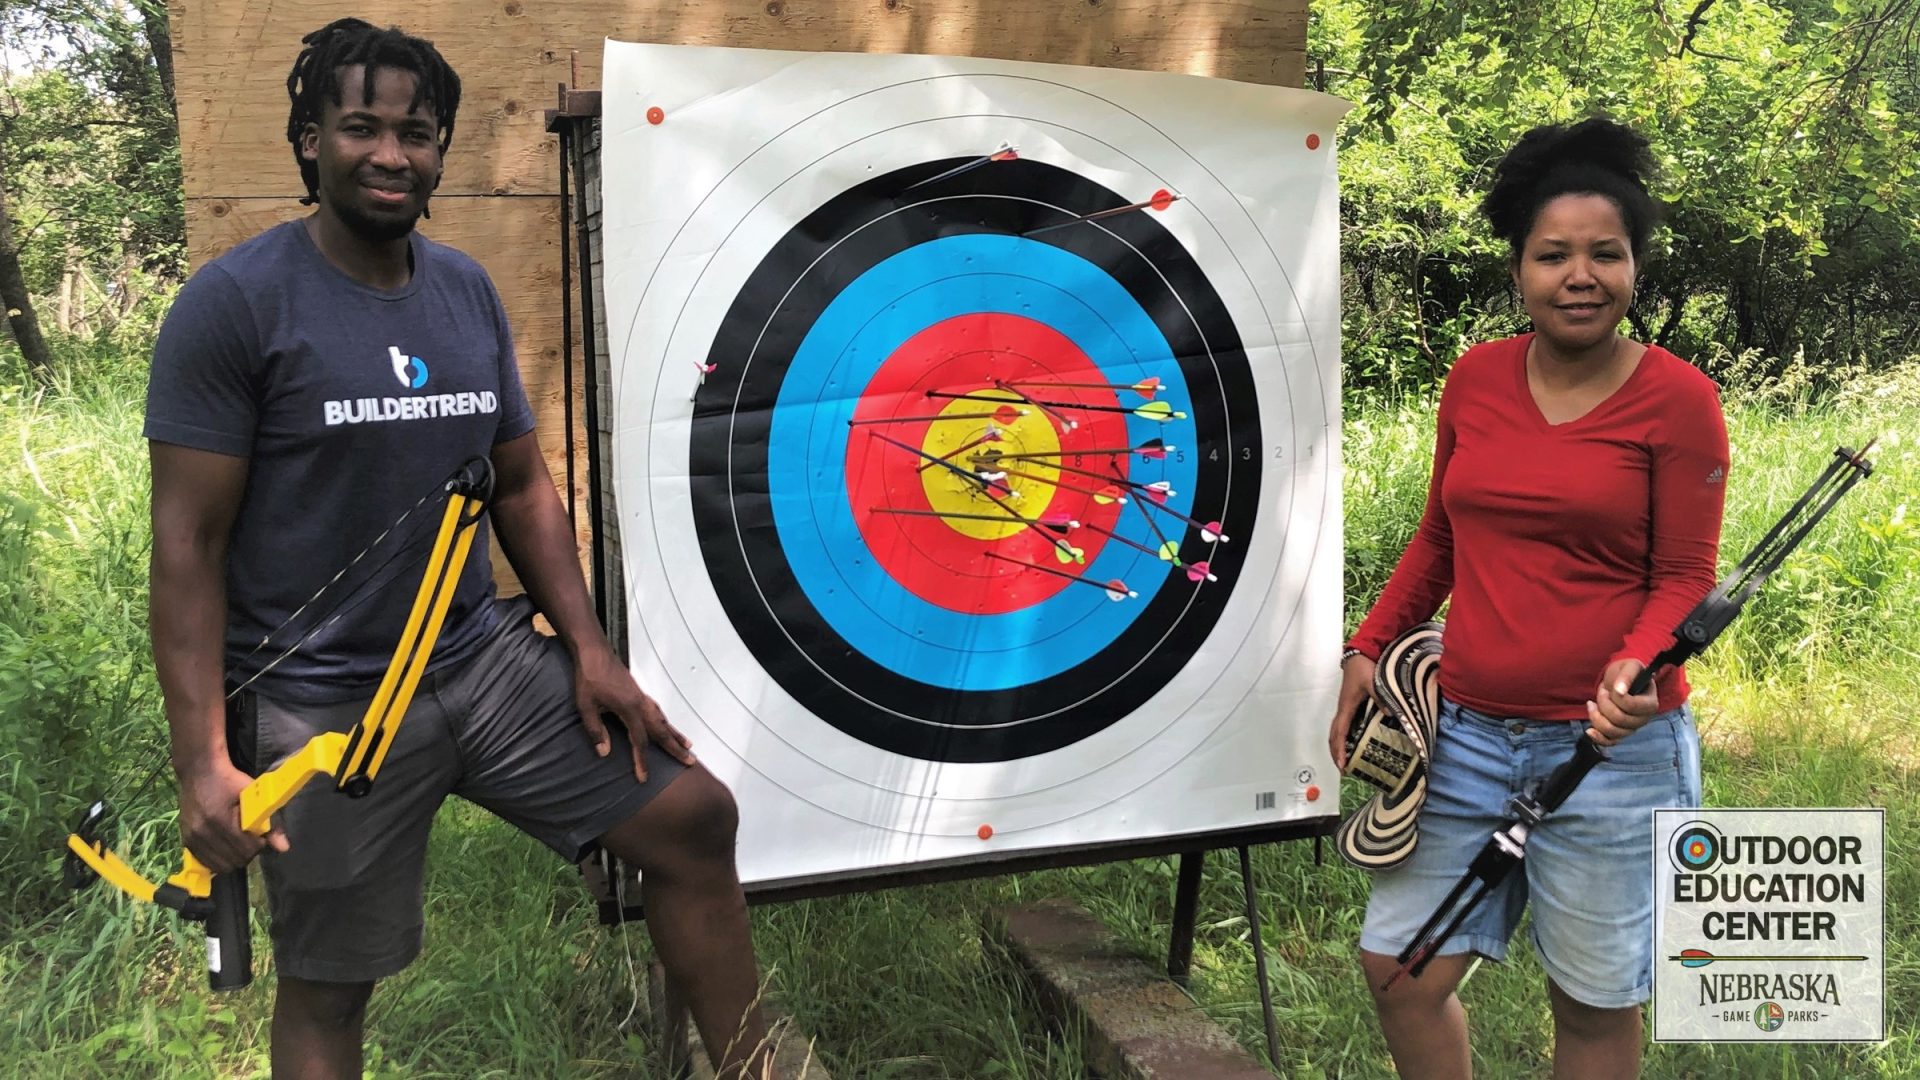 Two archers holding bows next to outdoor target